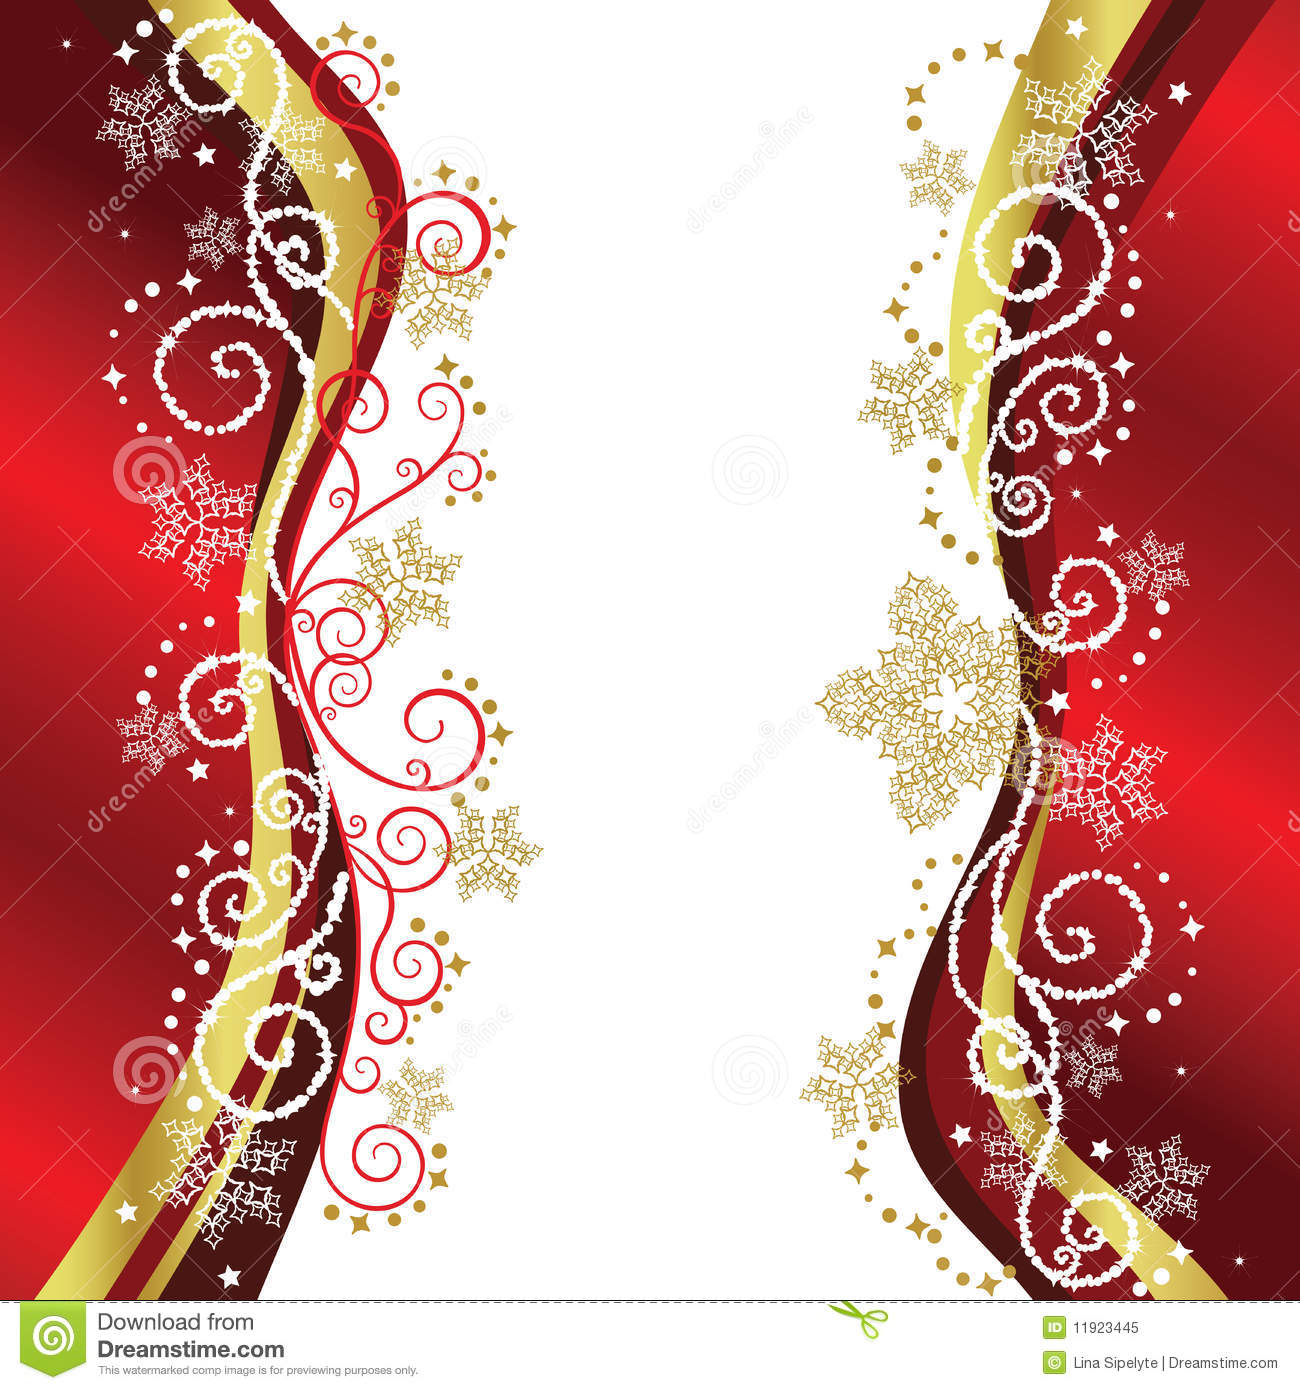 Red   Gold Christmas Border Designs Royalty Free Stock Photo   Image